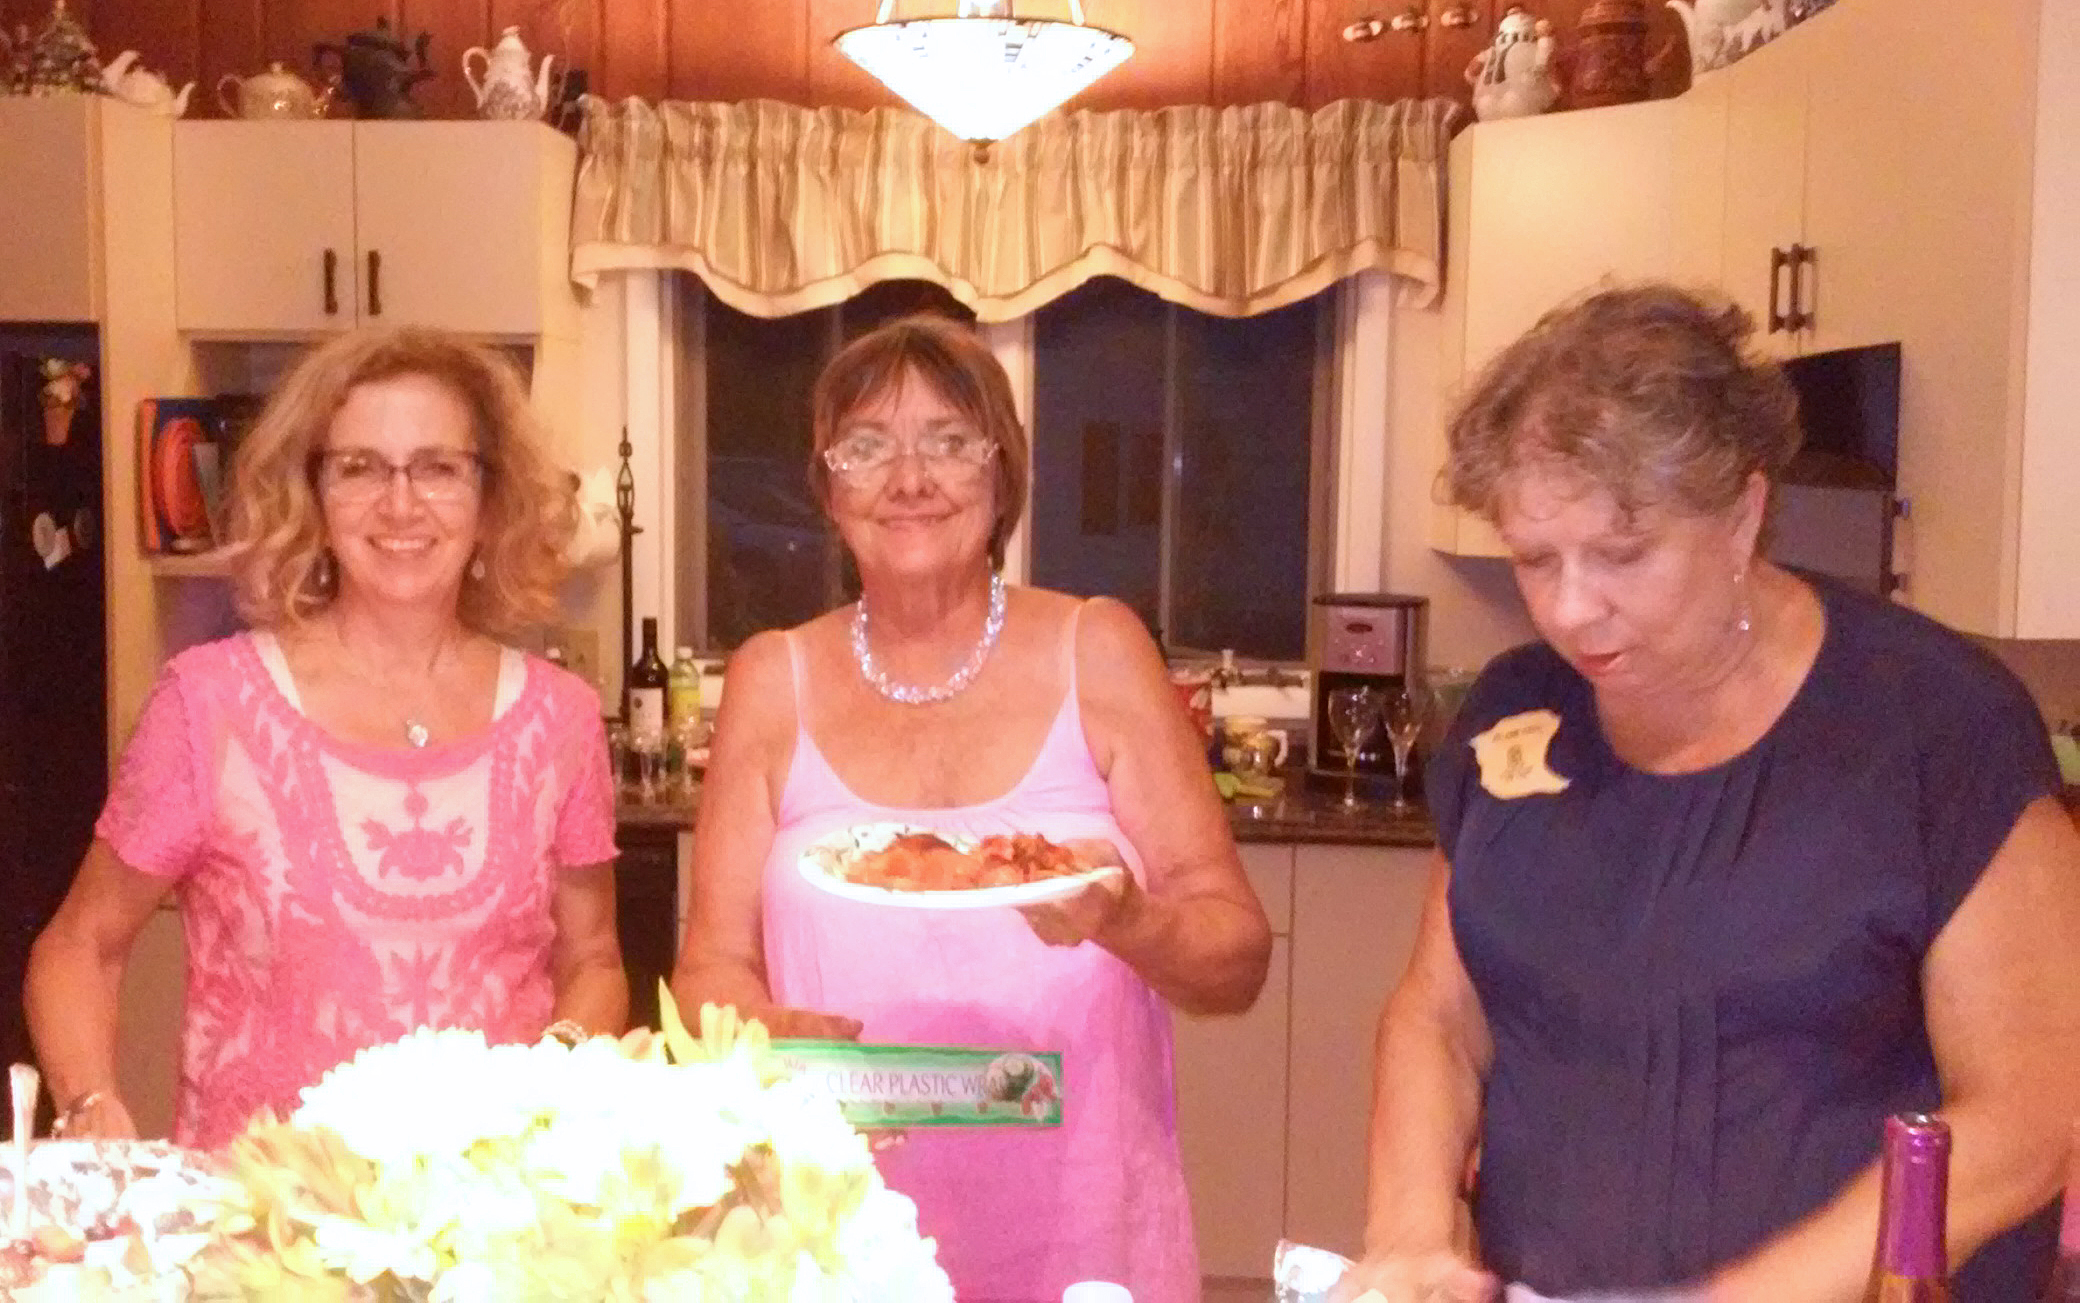 At Zonta's summer picnic, Denise, Linda and JoAnn get a helping of the food catered by McMahon's Family Restaurant.